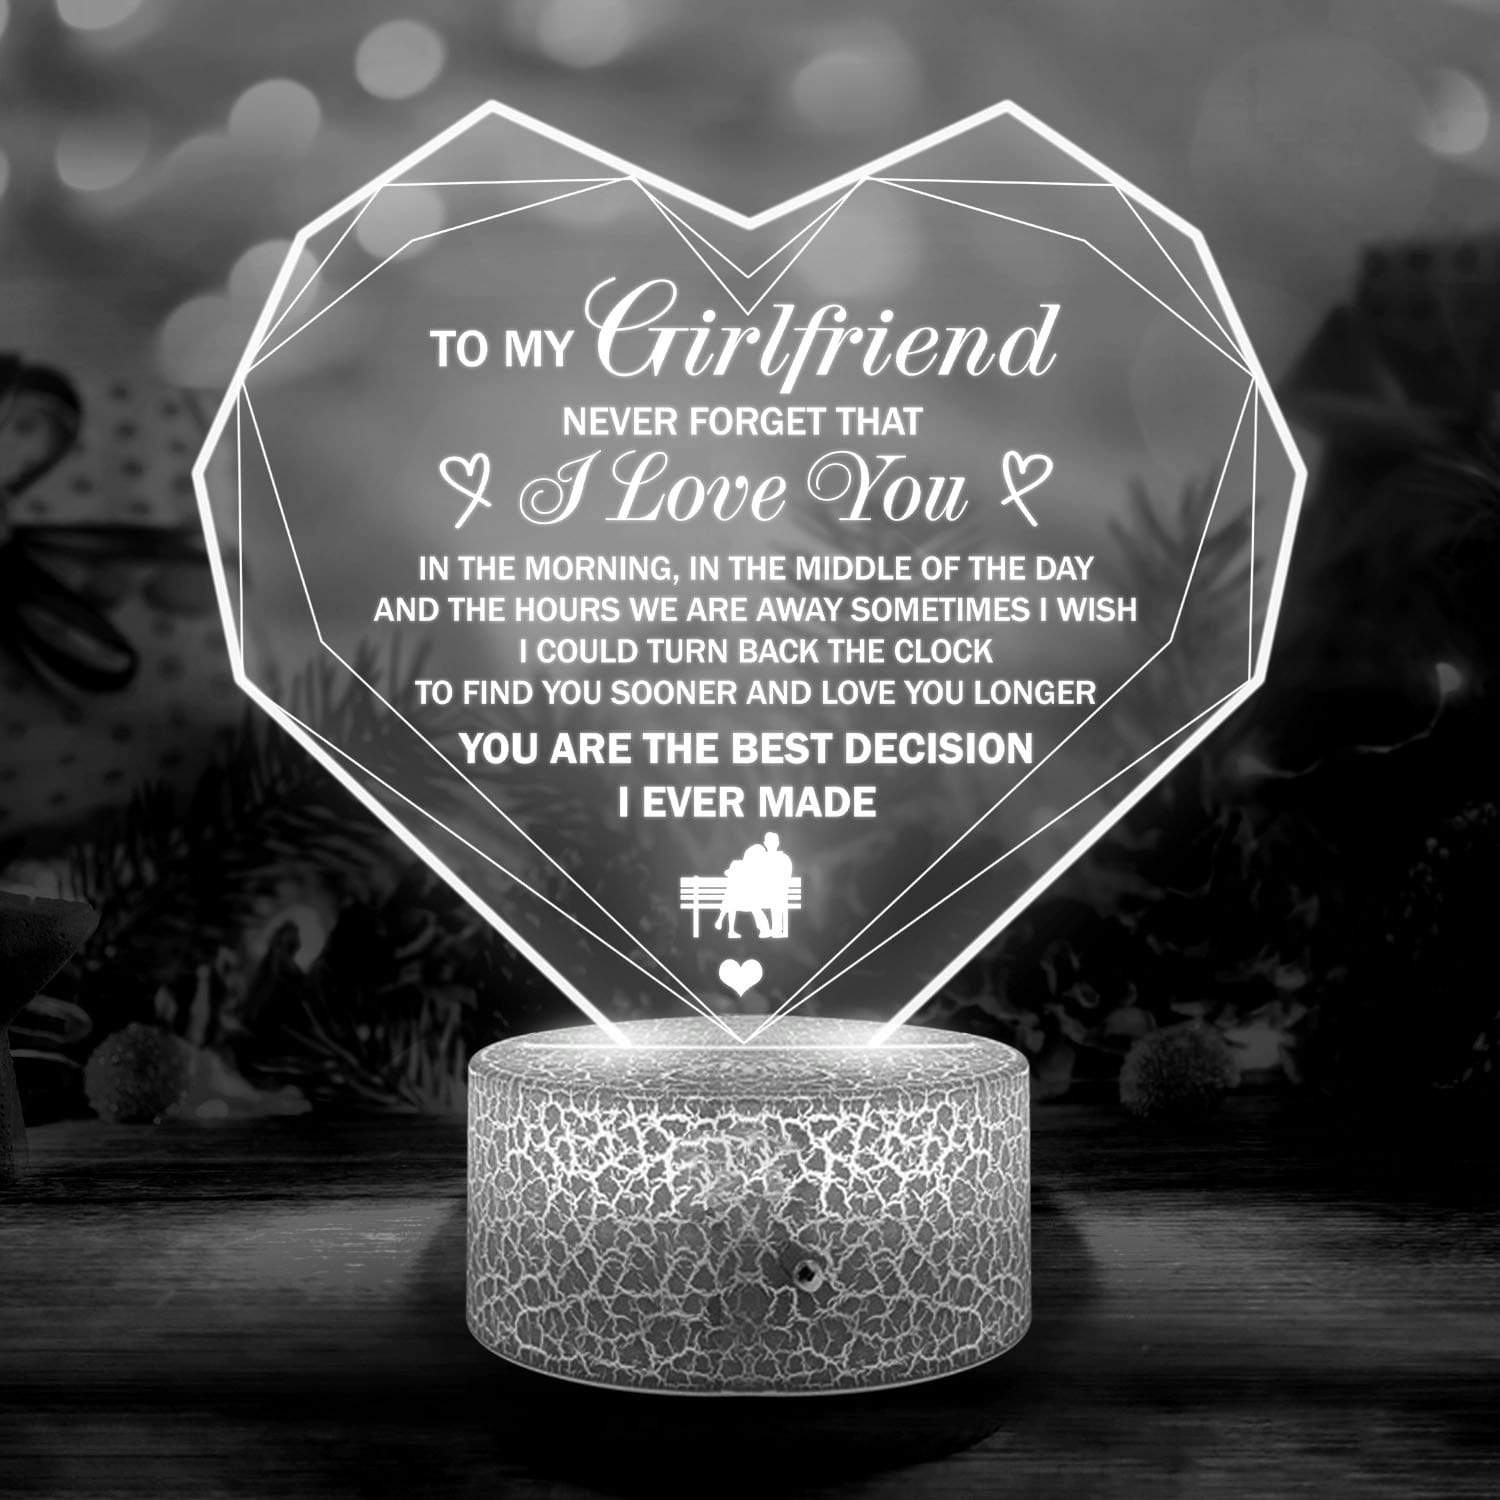 Heart Led Light - Family - To My Girlfriend - Never Forget That I Love You - Glca13006